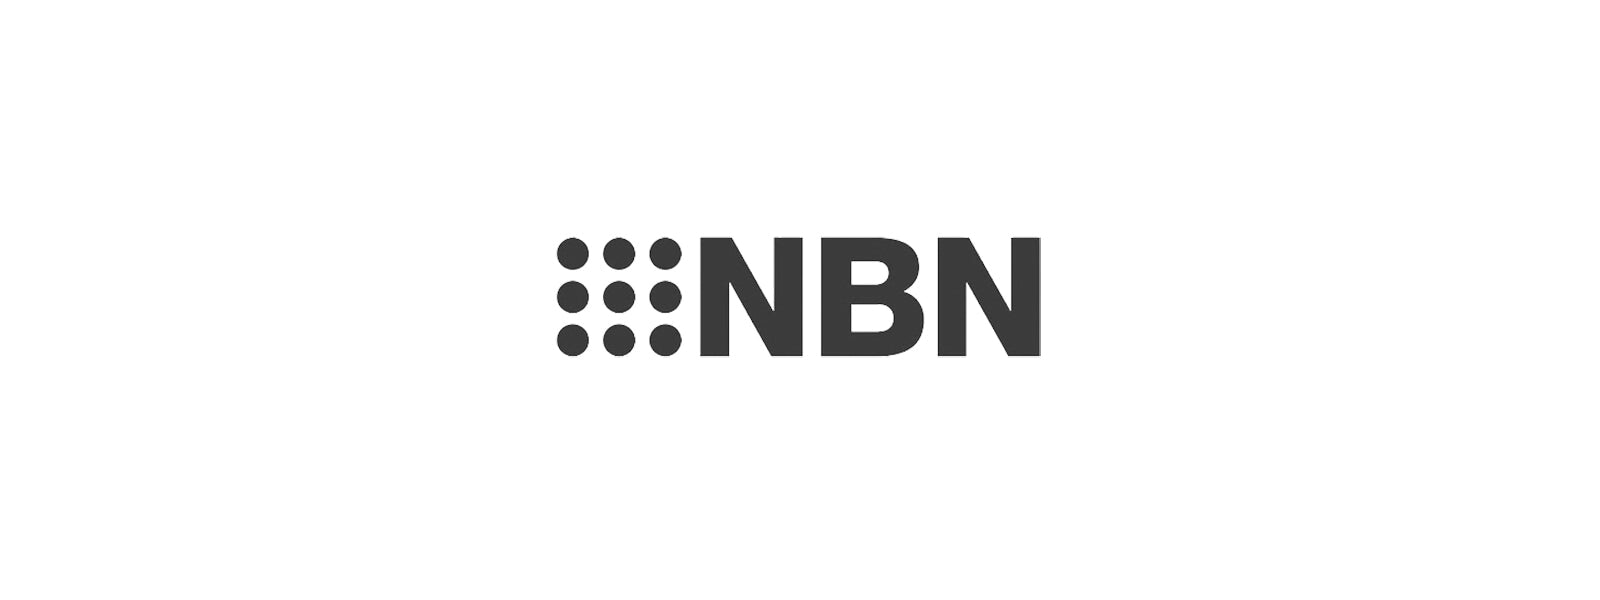 Small Businesses Given A Lifeline With Funding Boost │ NBN News